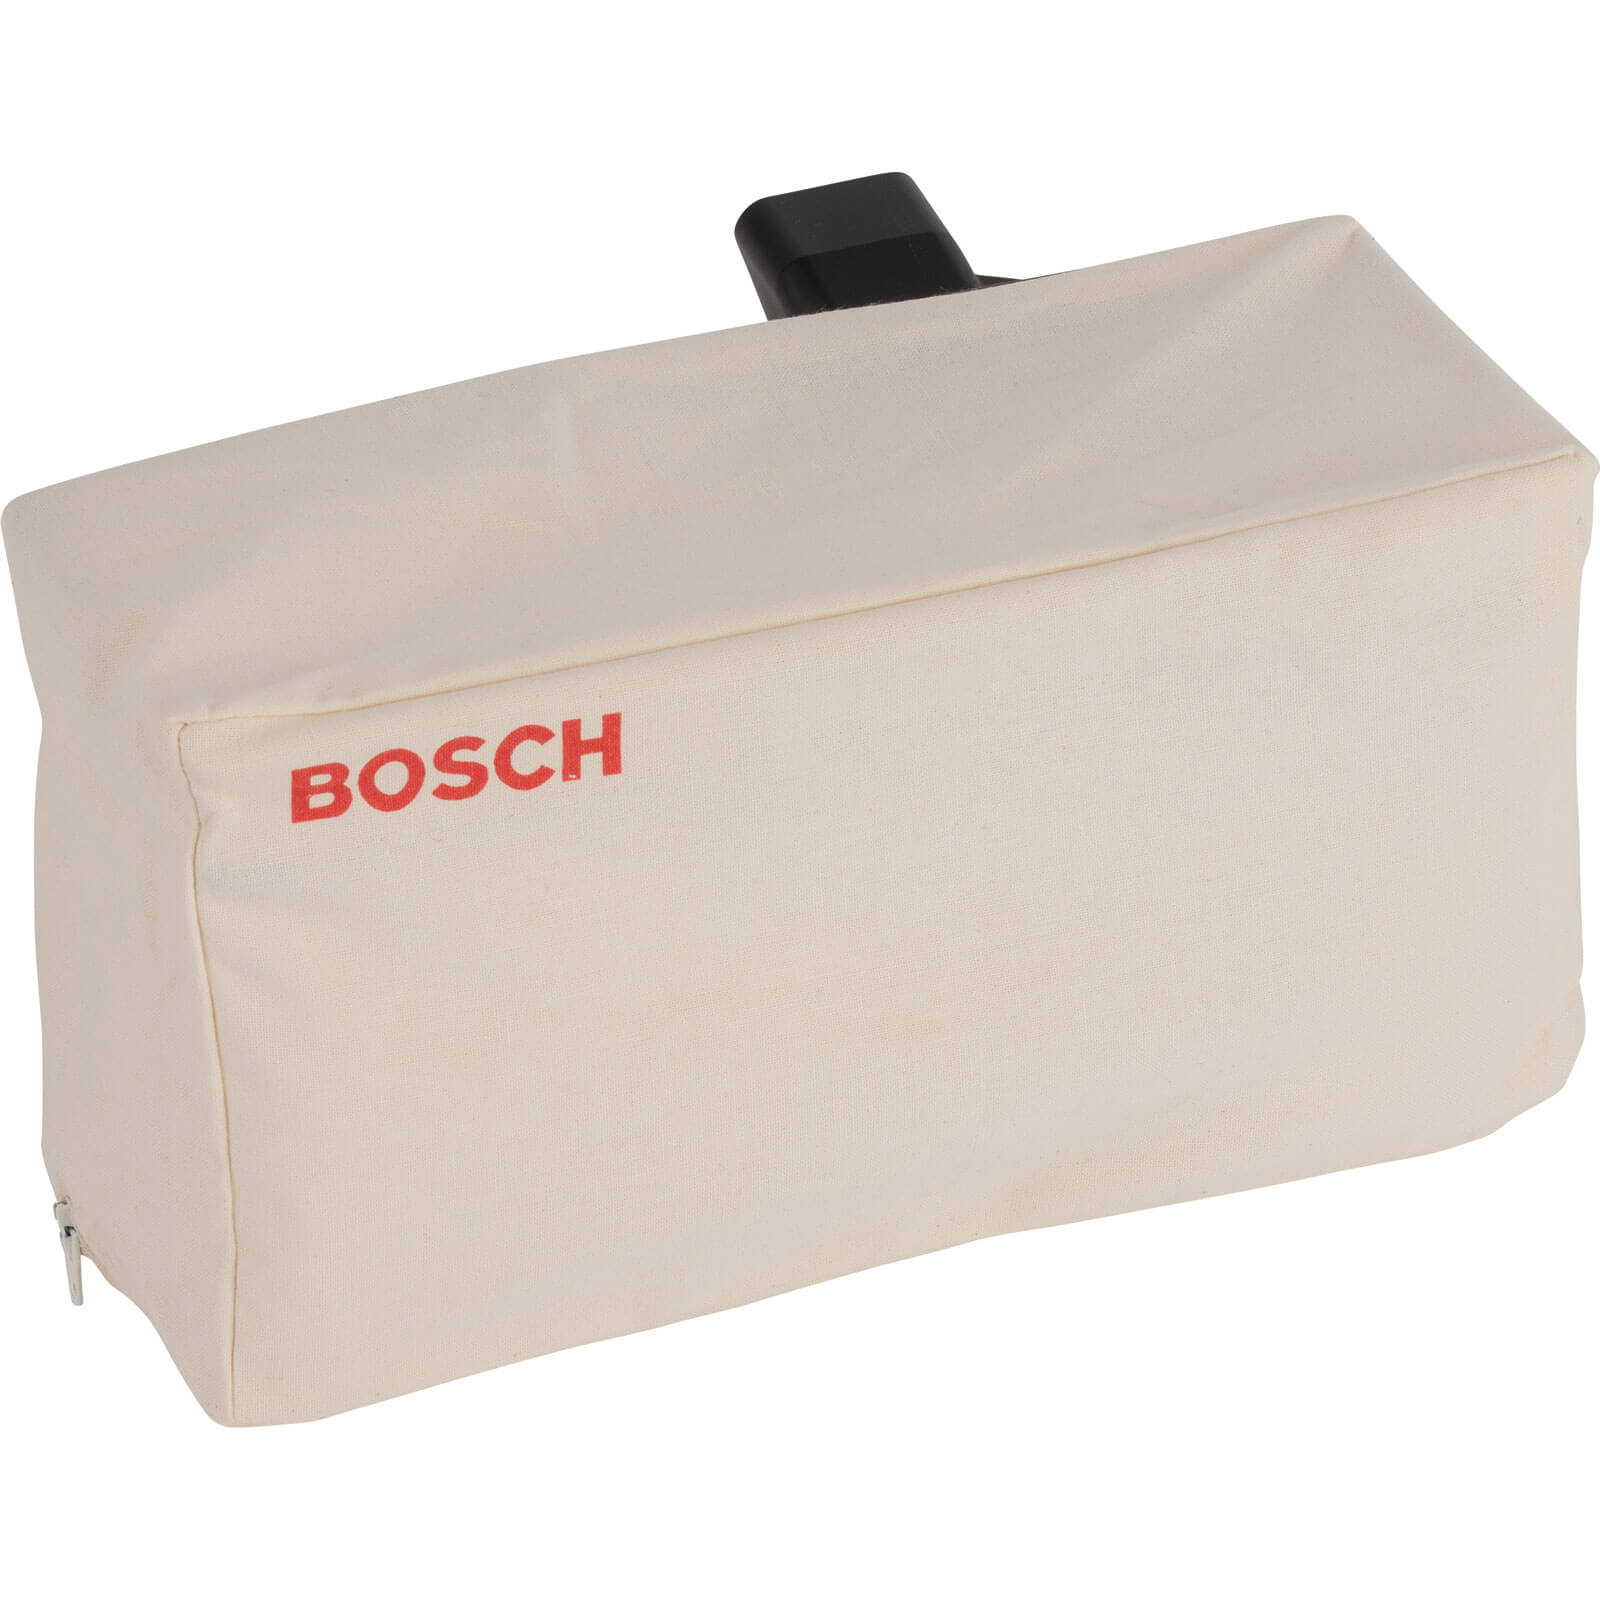 Photo of Bosch Dust Bag For Pho 1 And 15-82 And 100 Planers